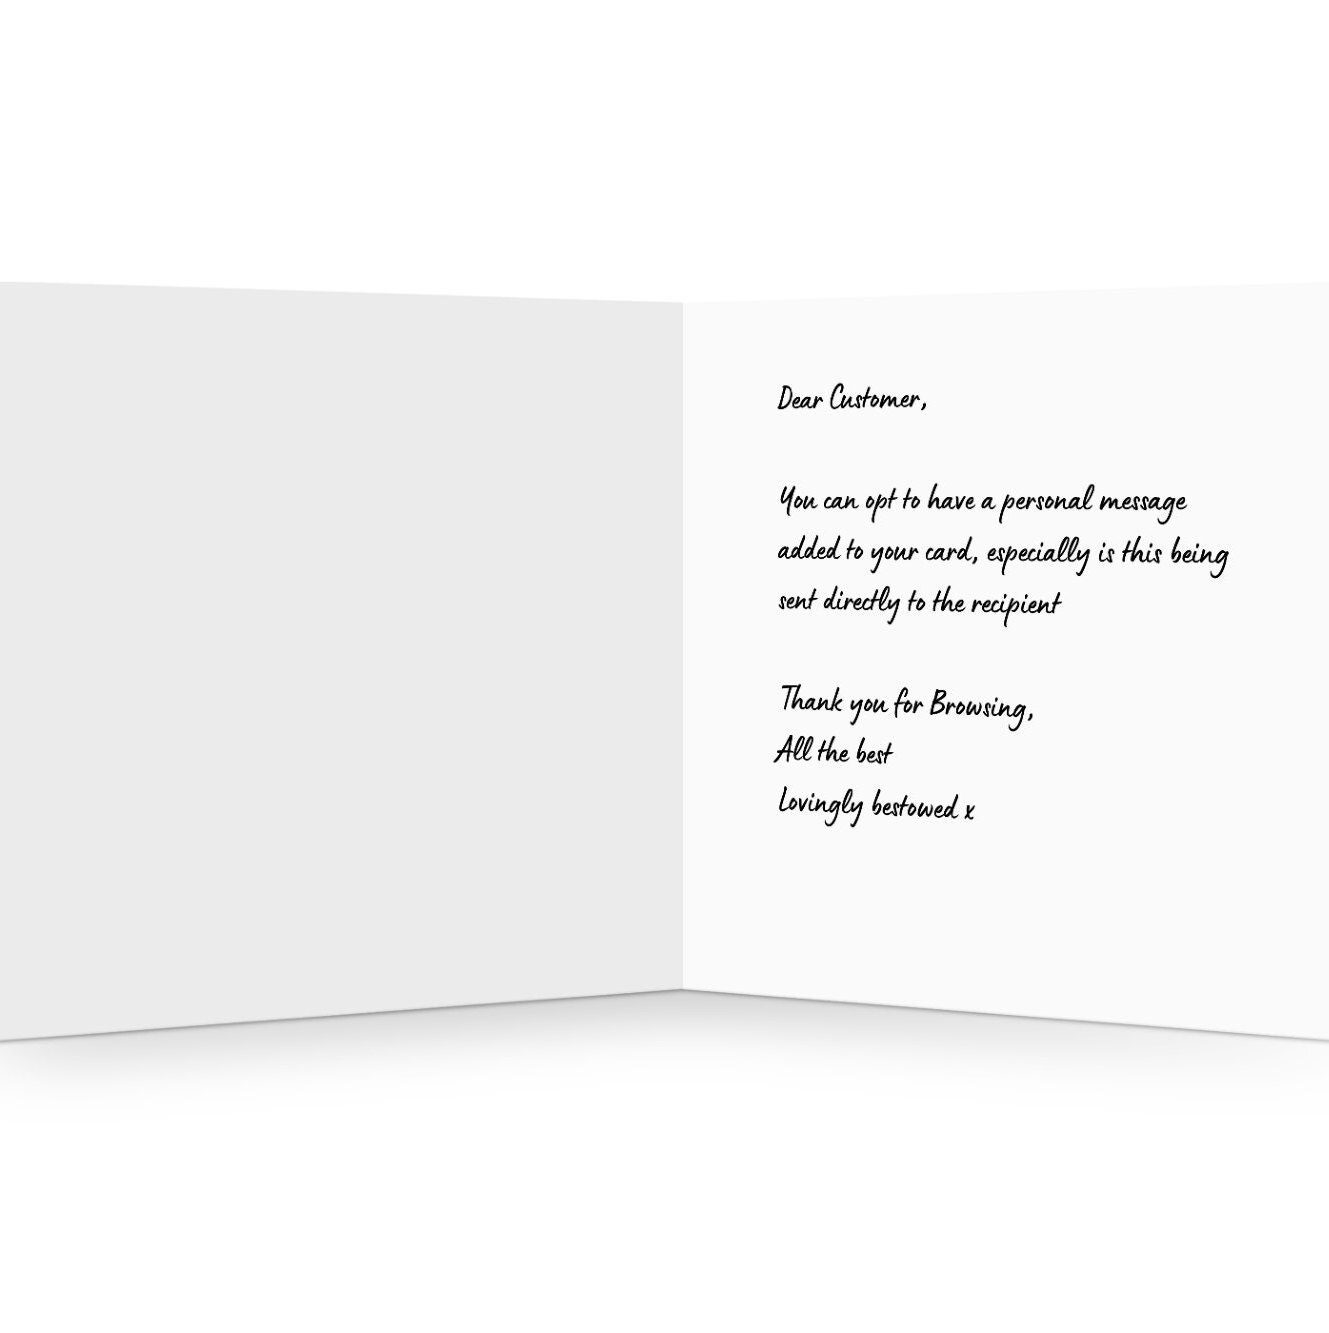 Baby Dedication Card for her